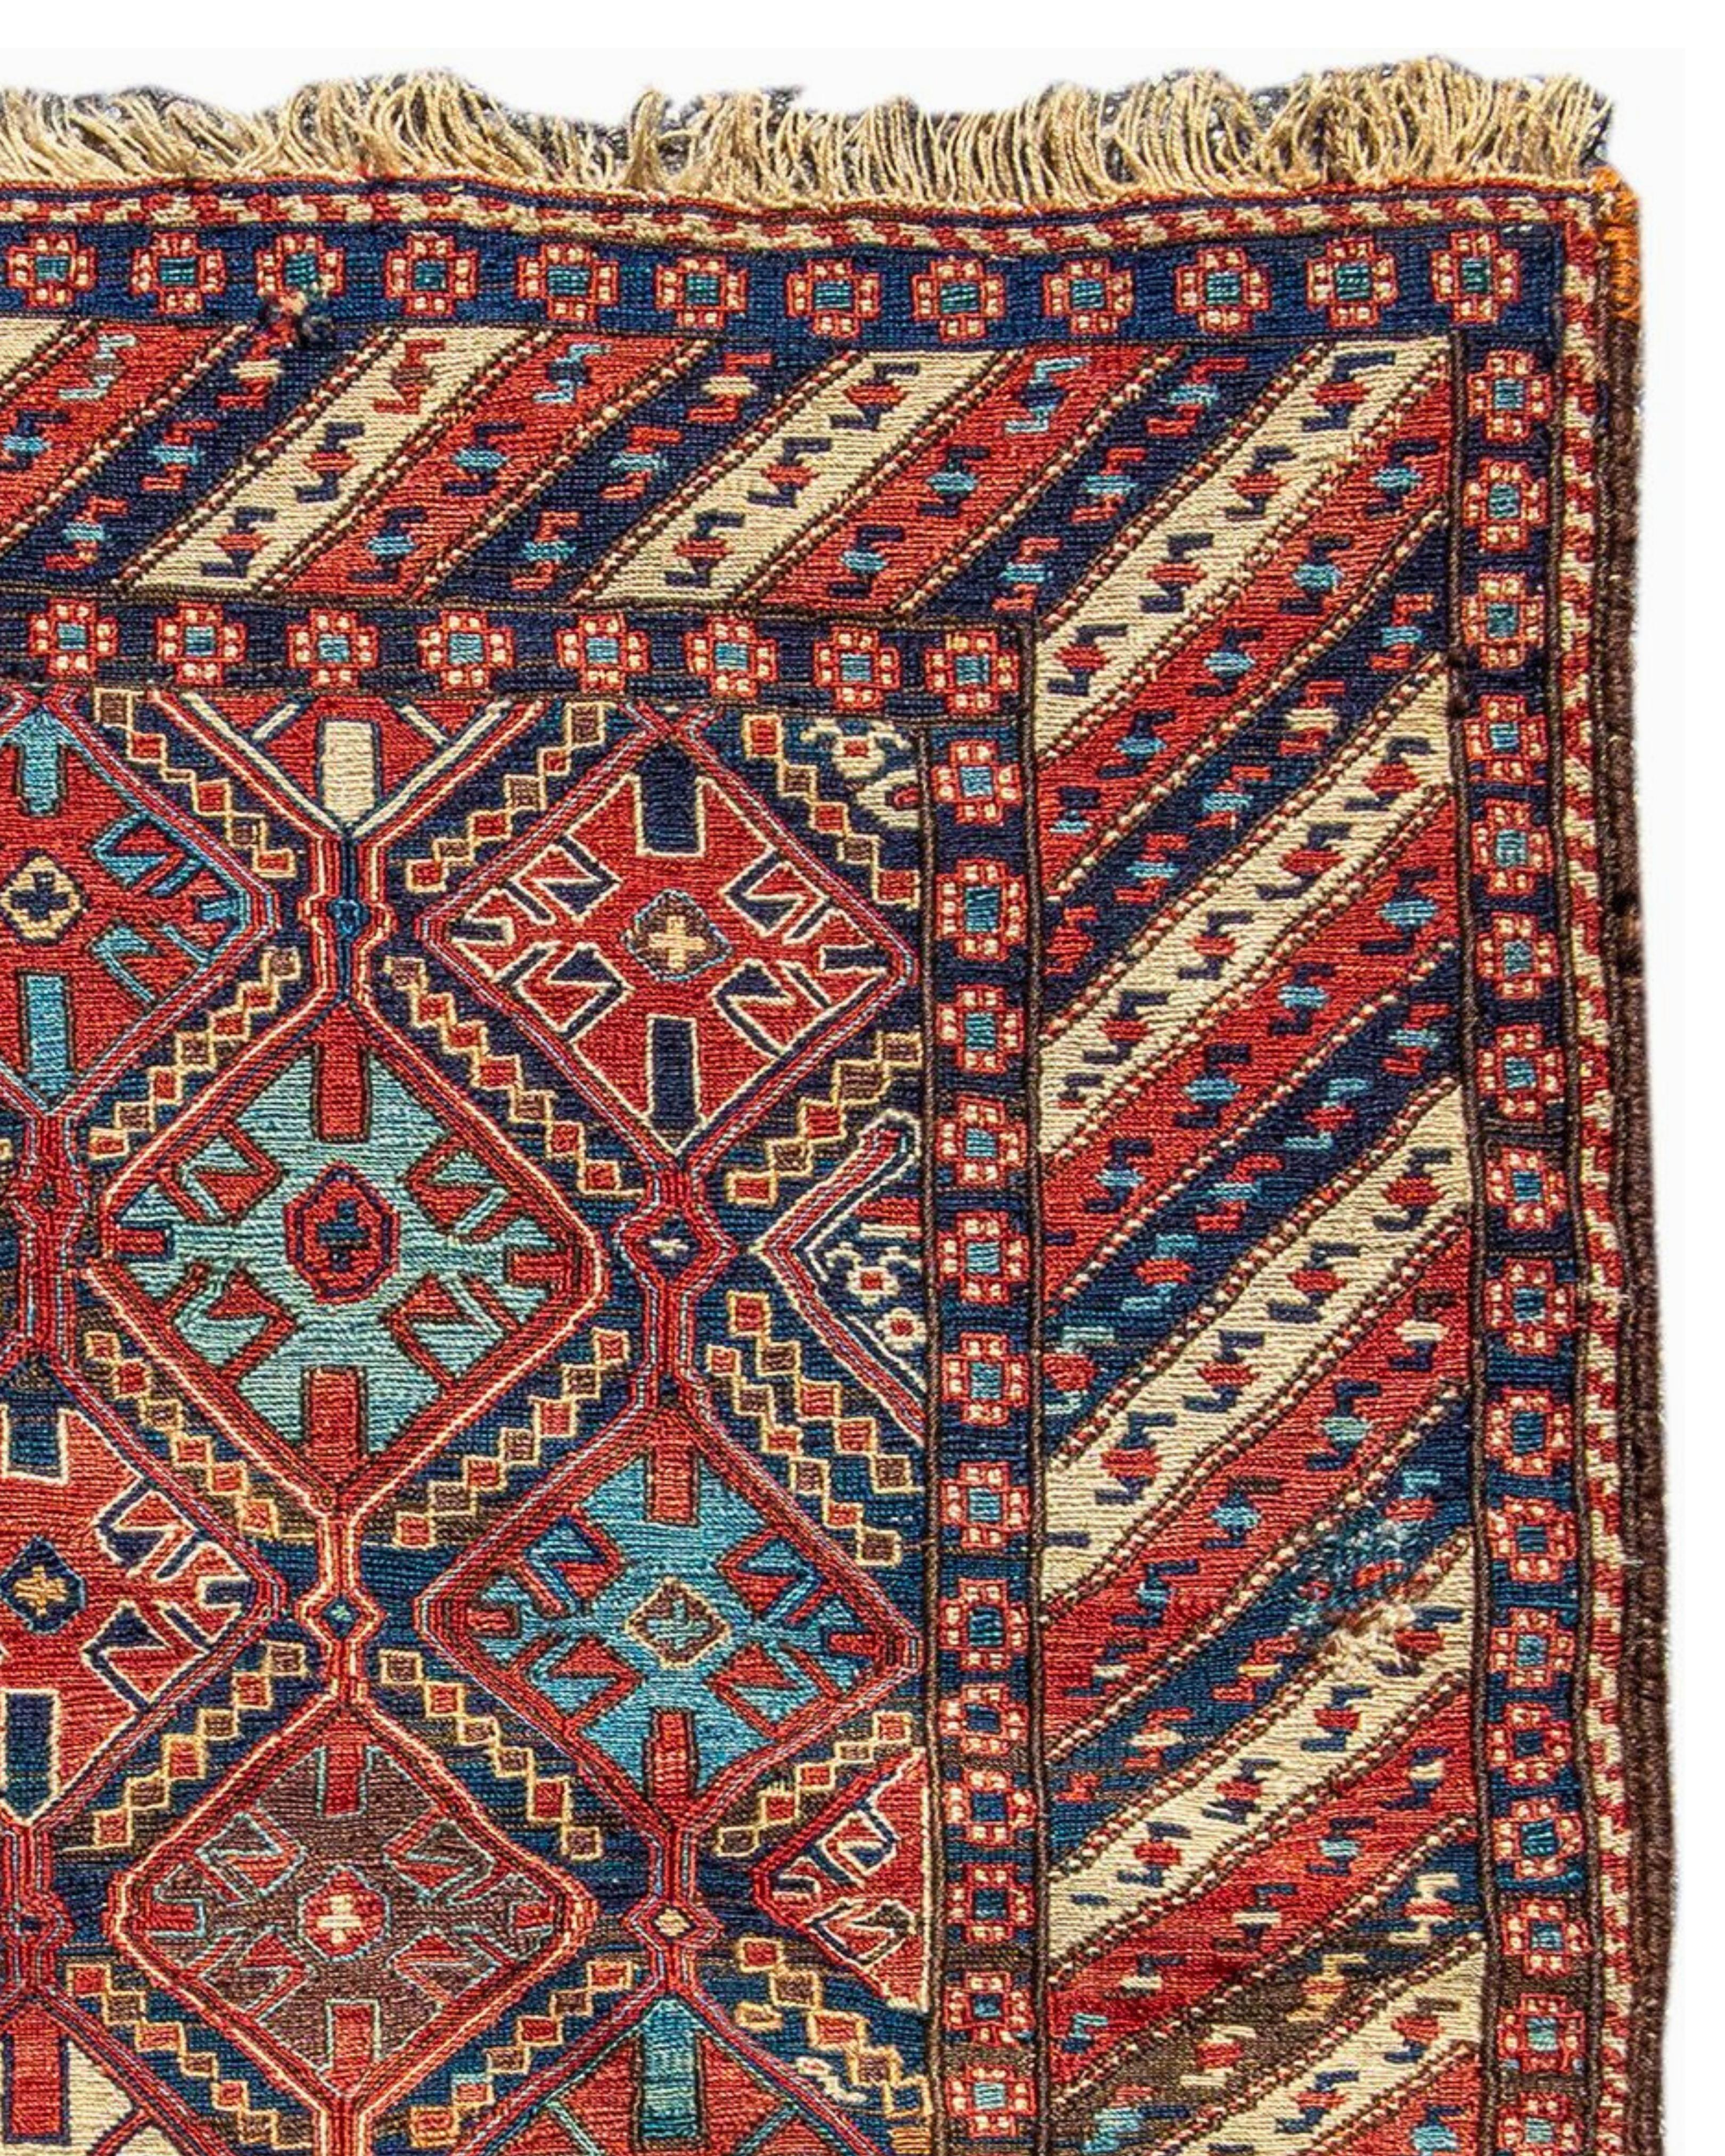 Antique Caucasian Shahsevan Sumak Bagface Rug, 19th Century

From the Collection of Dr. Charles Whitfield.

Additional Information:
Dimensions: 2'5